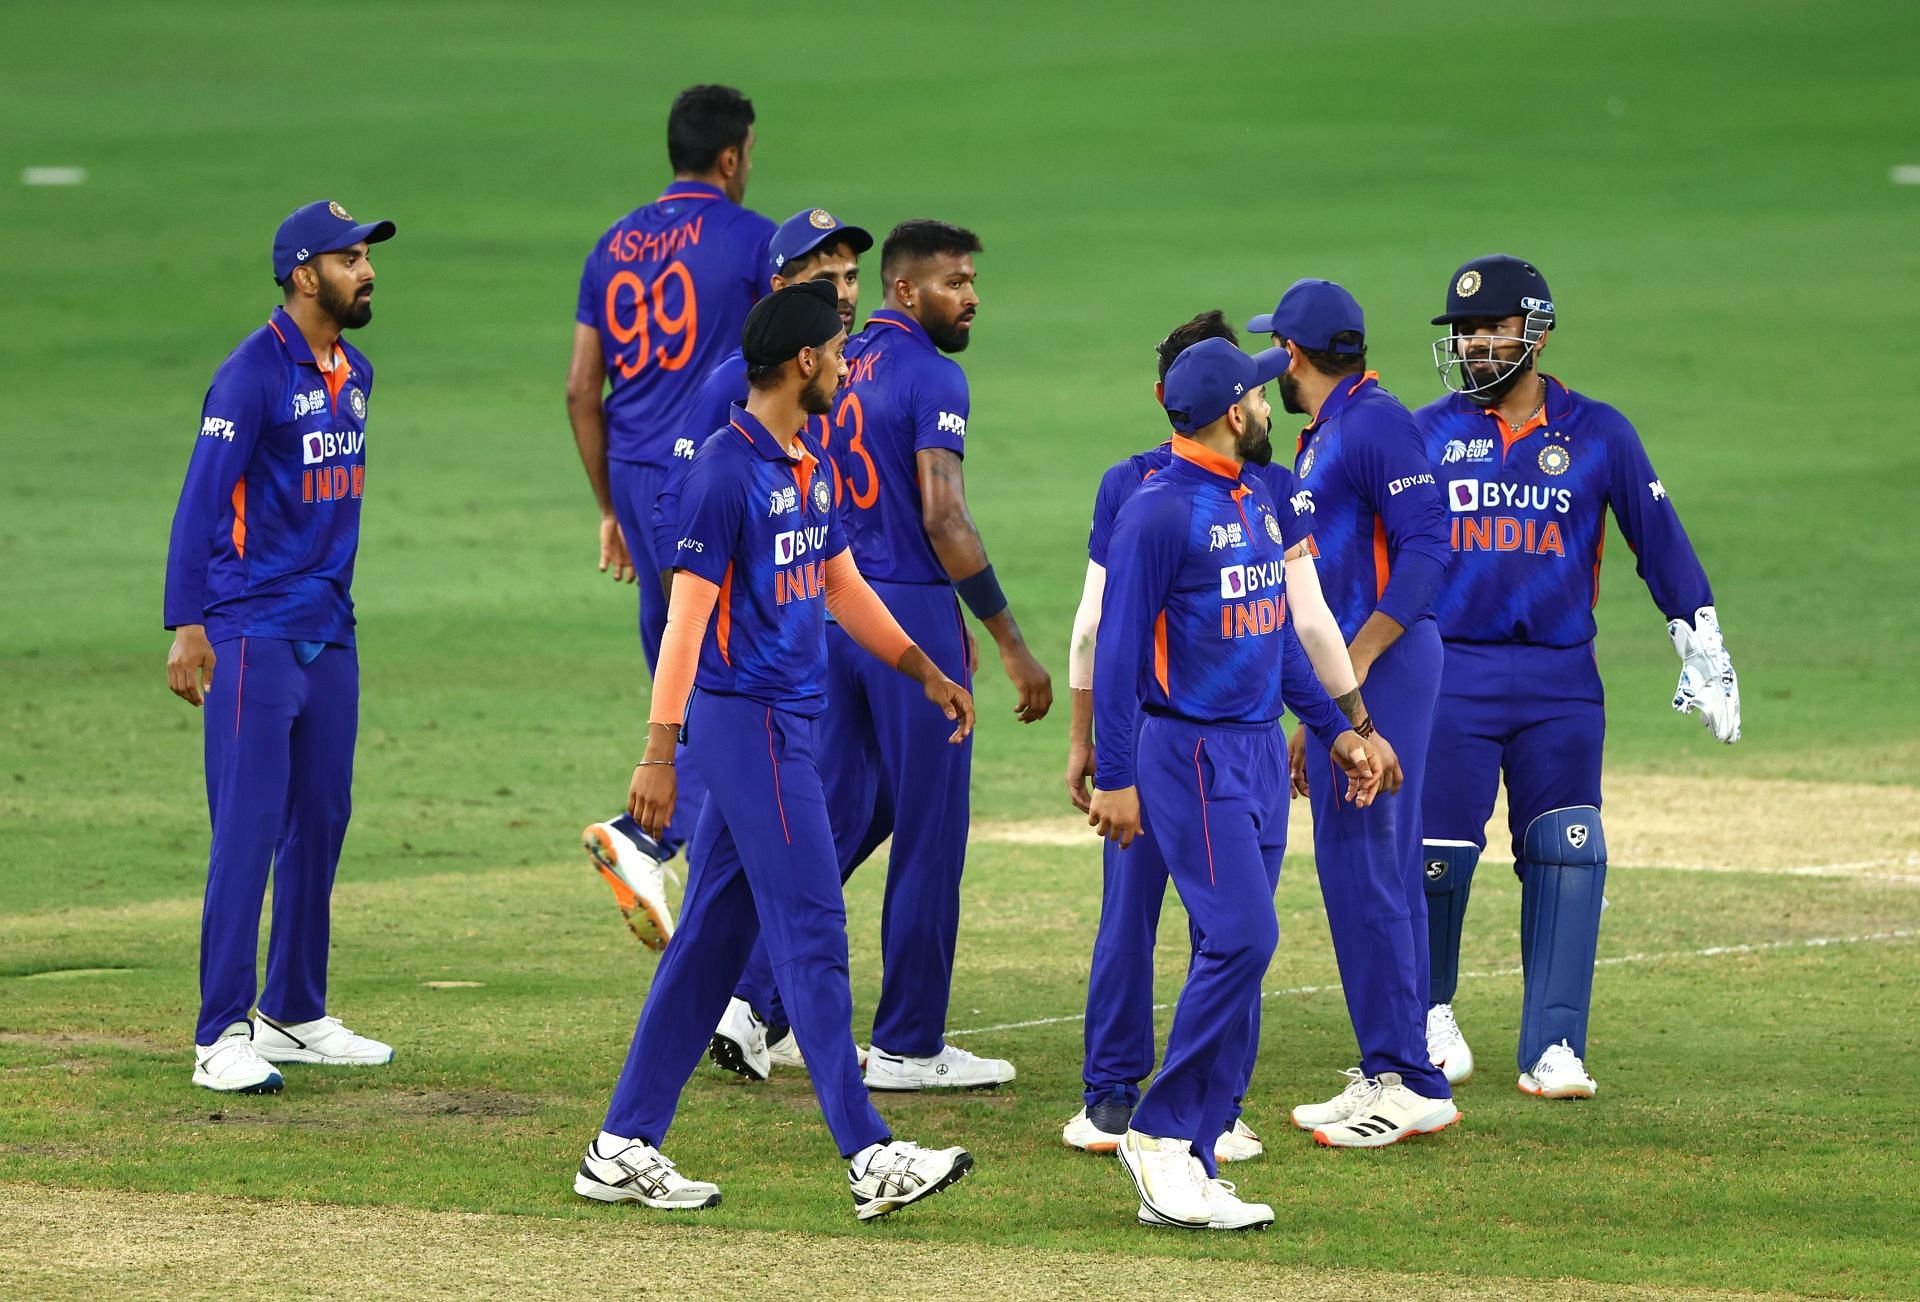 Asia Cup 2022: 5 observations from India's loss to Sri Lanka and their likely exit from the tournament